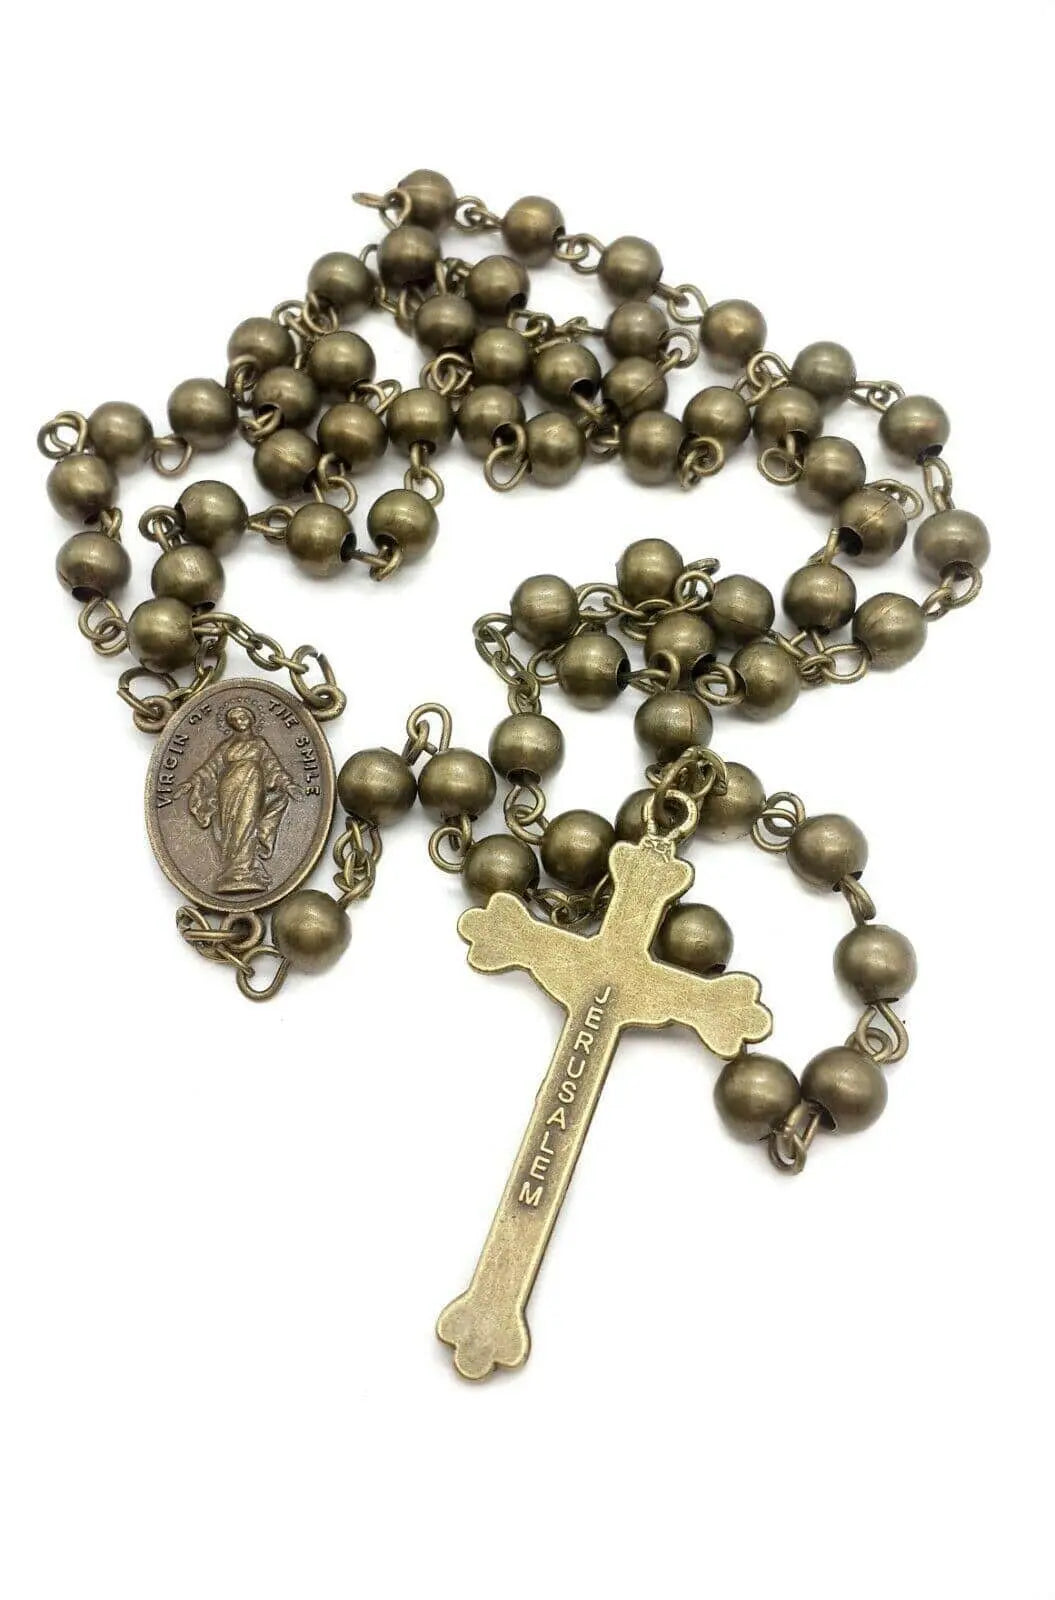 Why You Need to Have a Reliable Catholic Gift Shop Online at Your Disposal